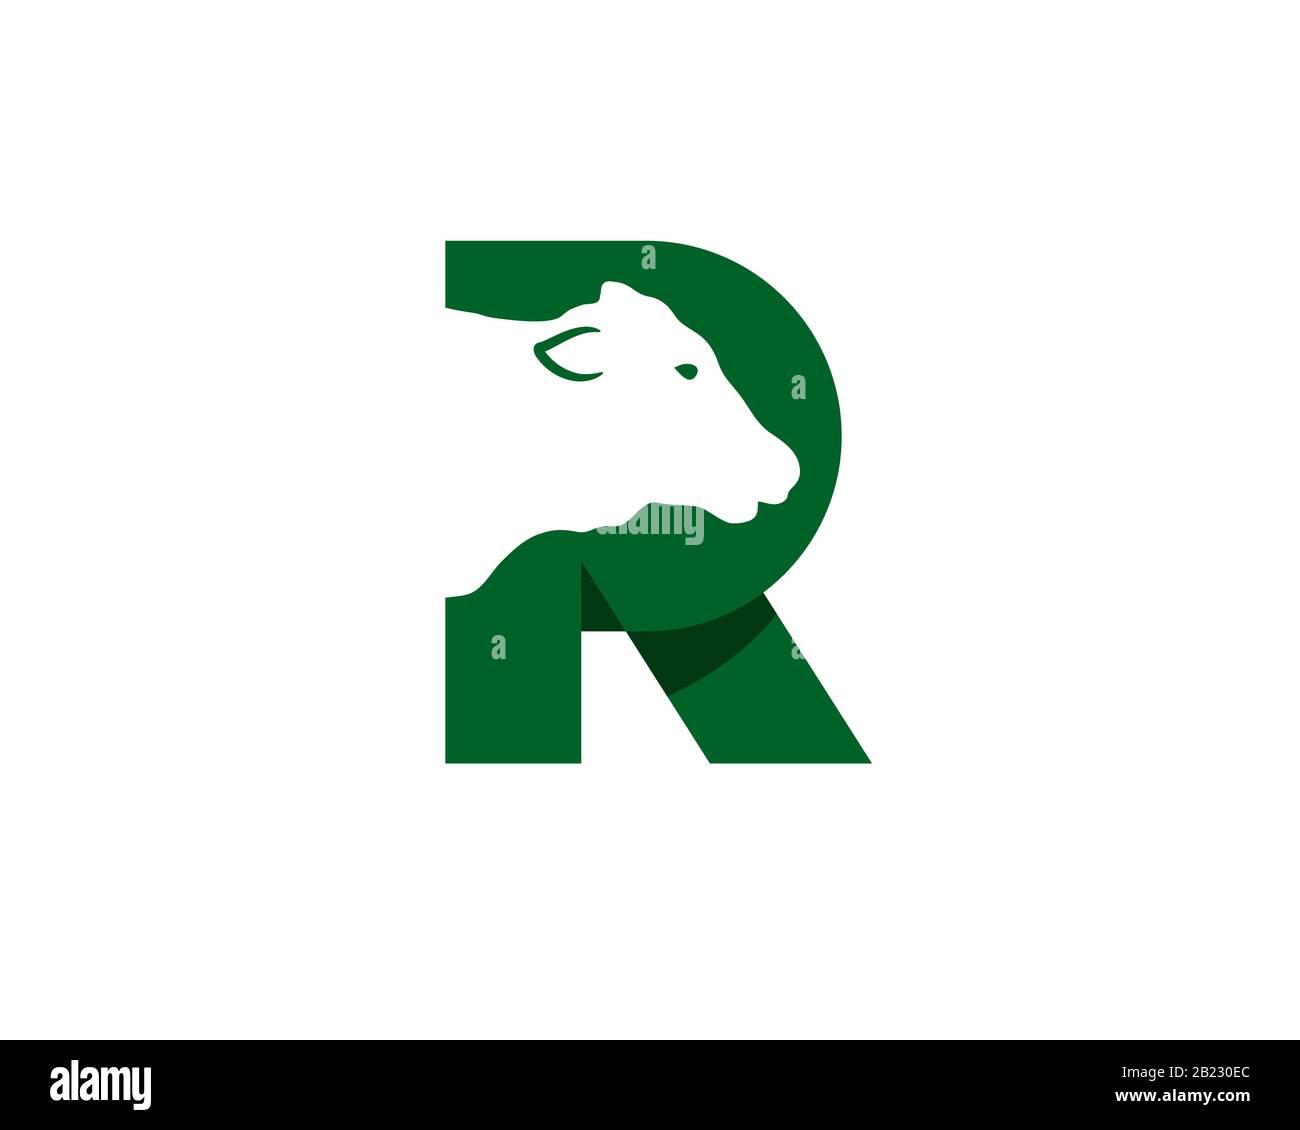 monogram anagram lettermark logo of letter R with negative space cow head inside Stock Vector